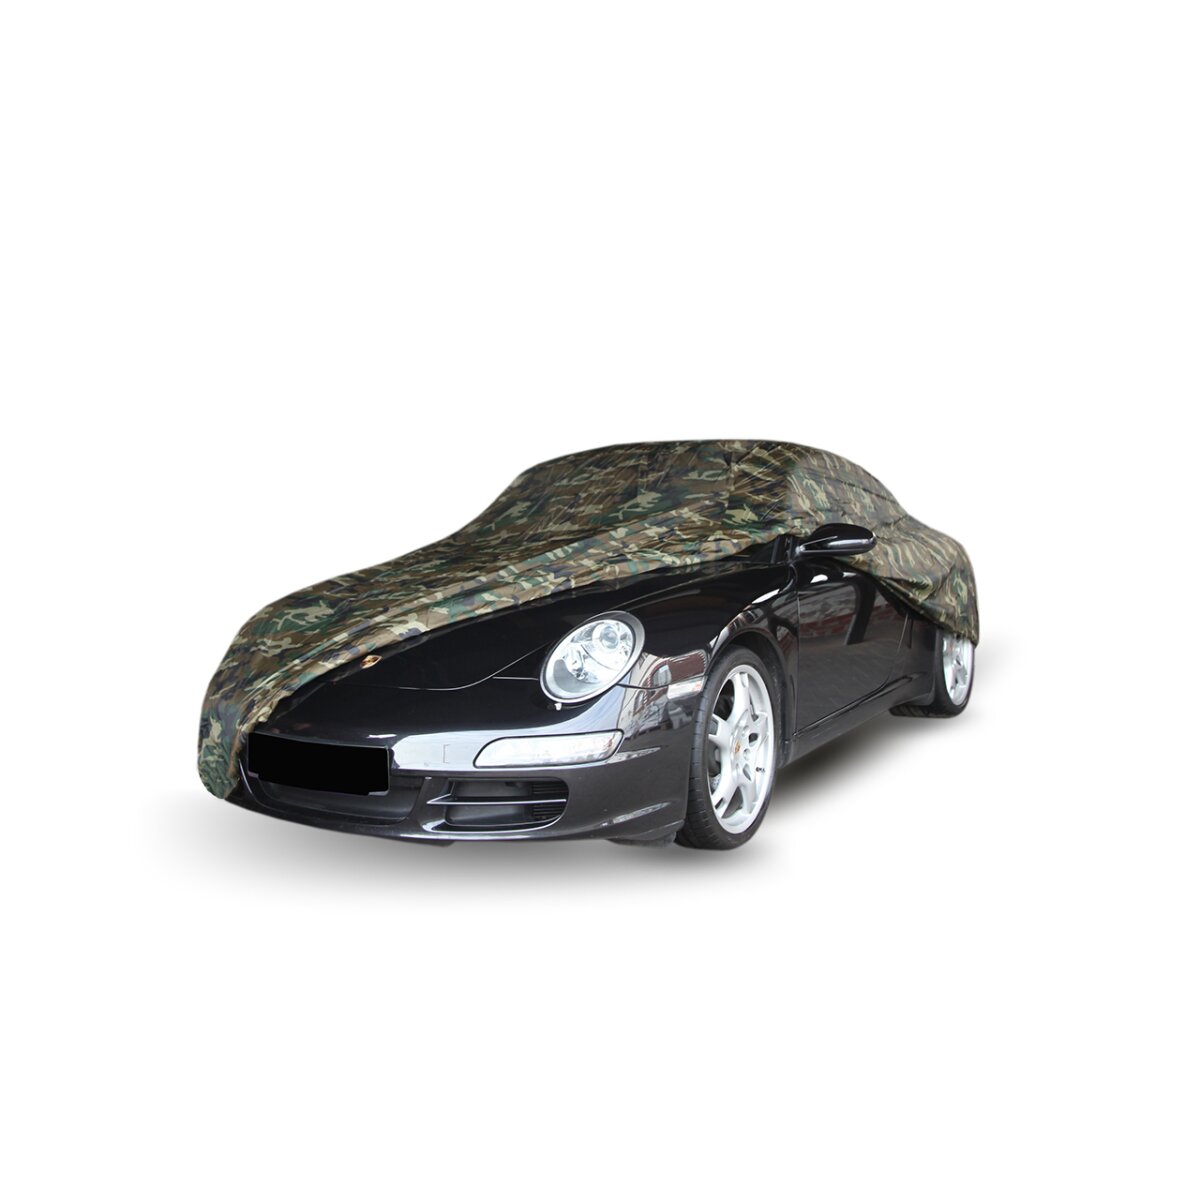 https://www.autoabdeckung.com/media/image/product/12491/lg/autoabdeckung-car-cover-camouflage-fuer-audi-s8-d2.jpg